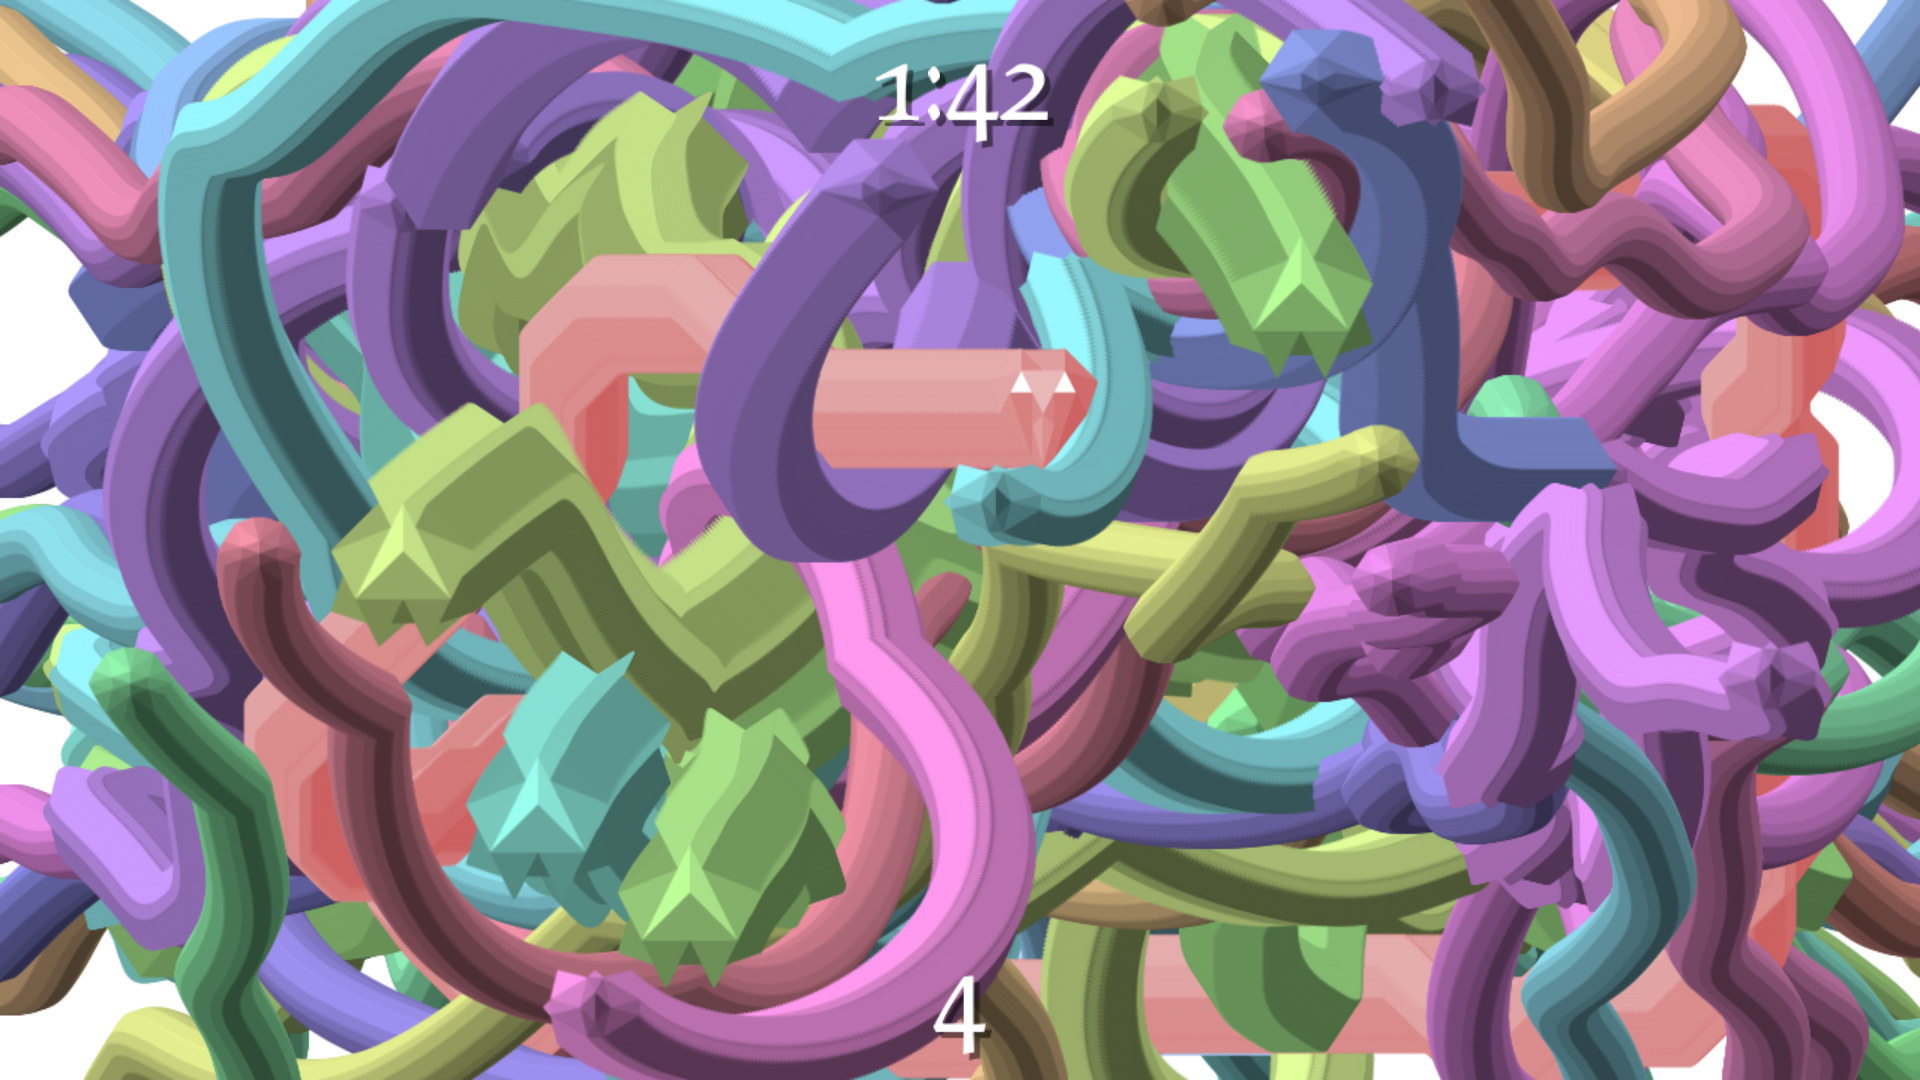 A screenshot of the game. A strange mess of extruded abstract shapes, with a timer reading '1:42' at the top of the screen, and a score of 4 at the bottom.